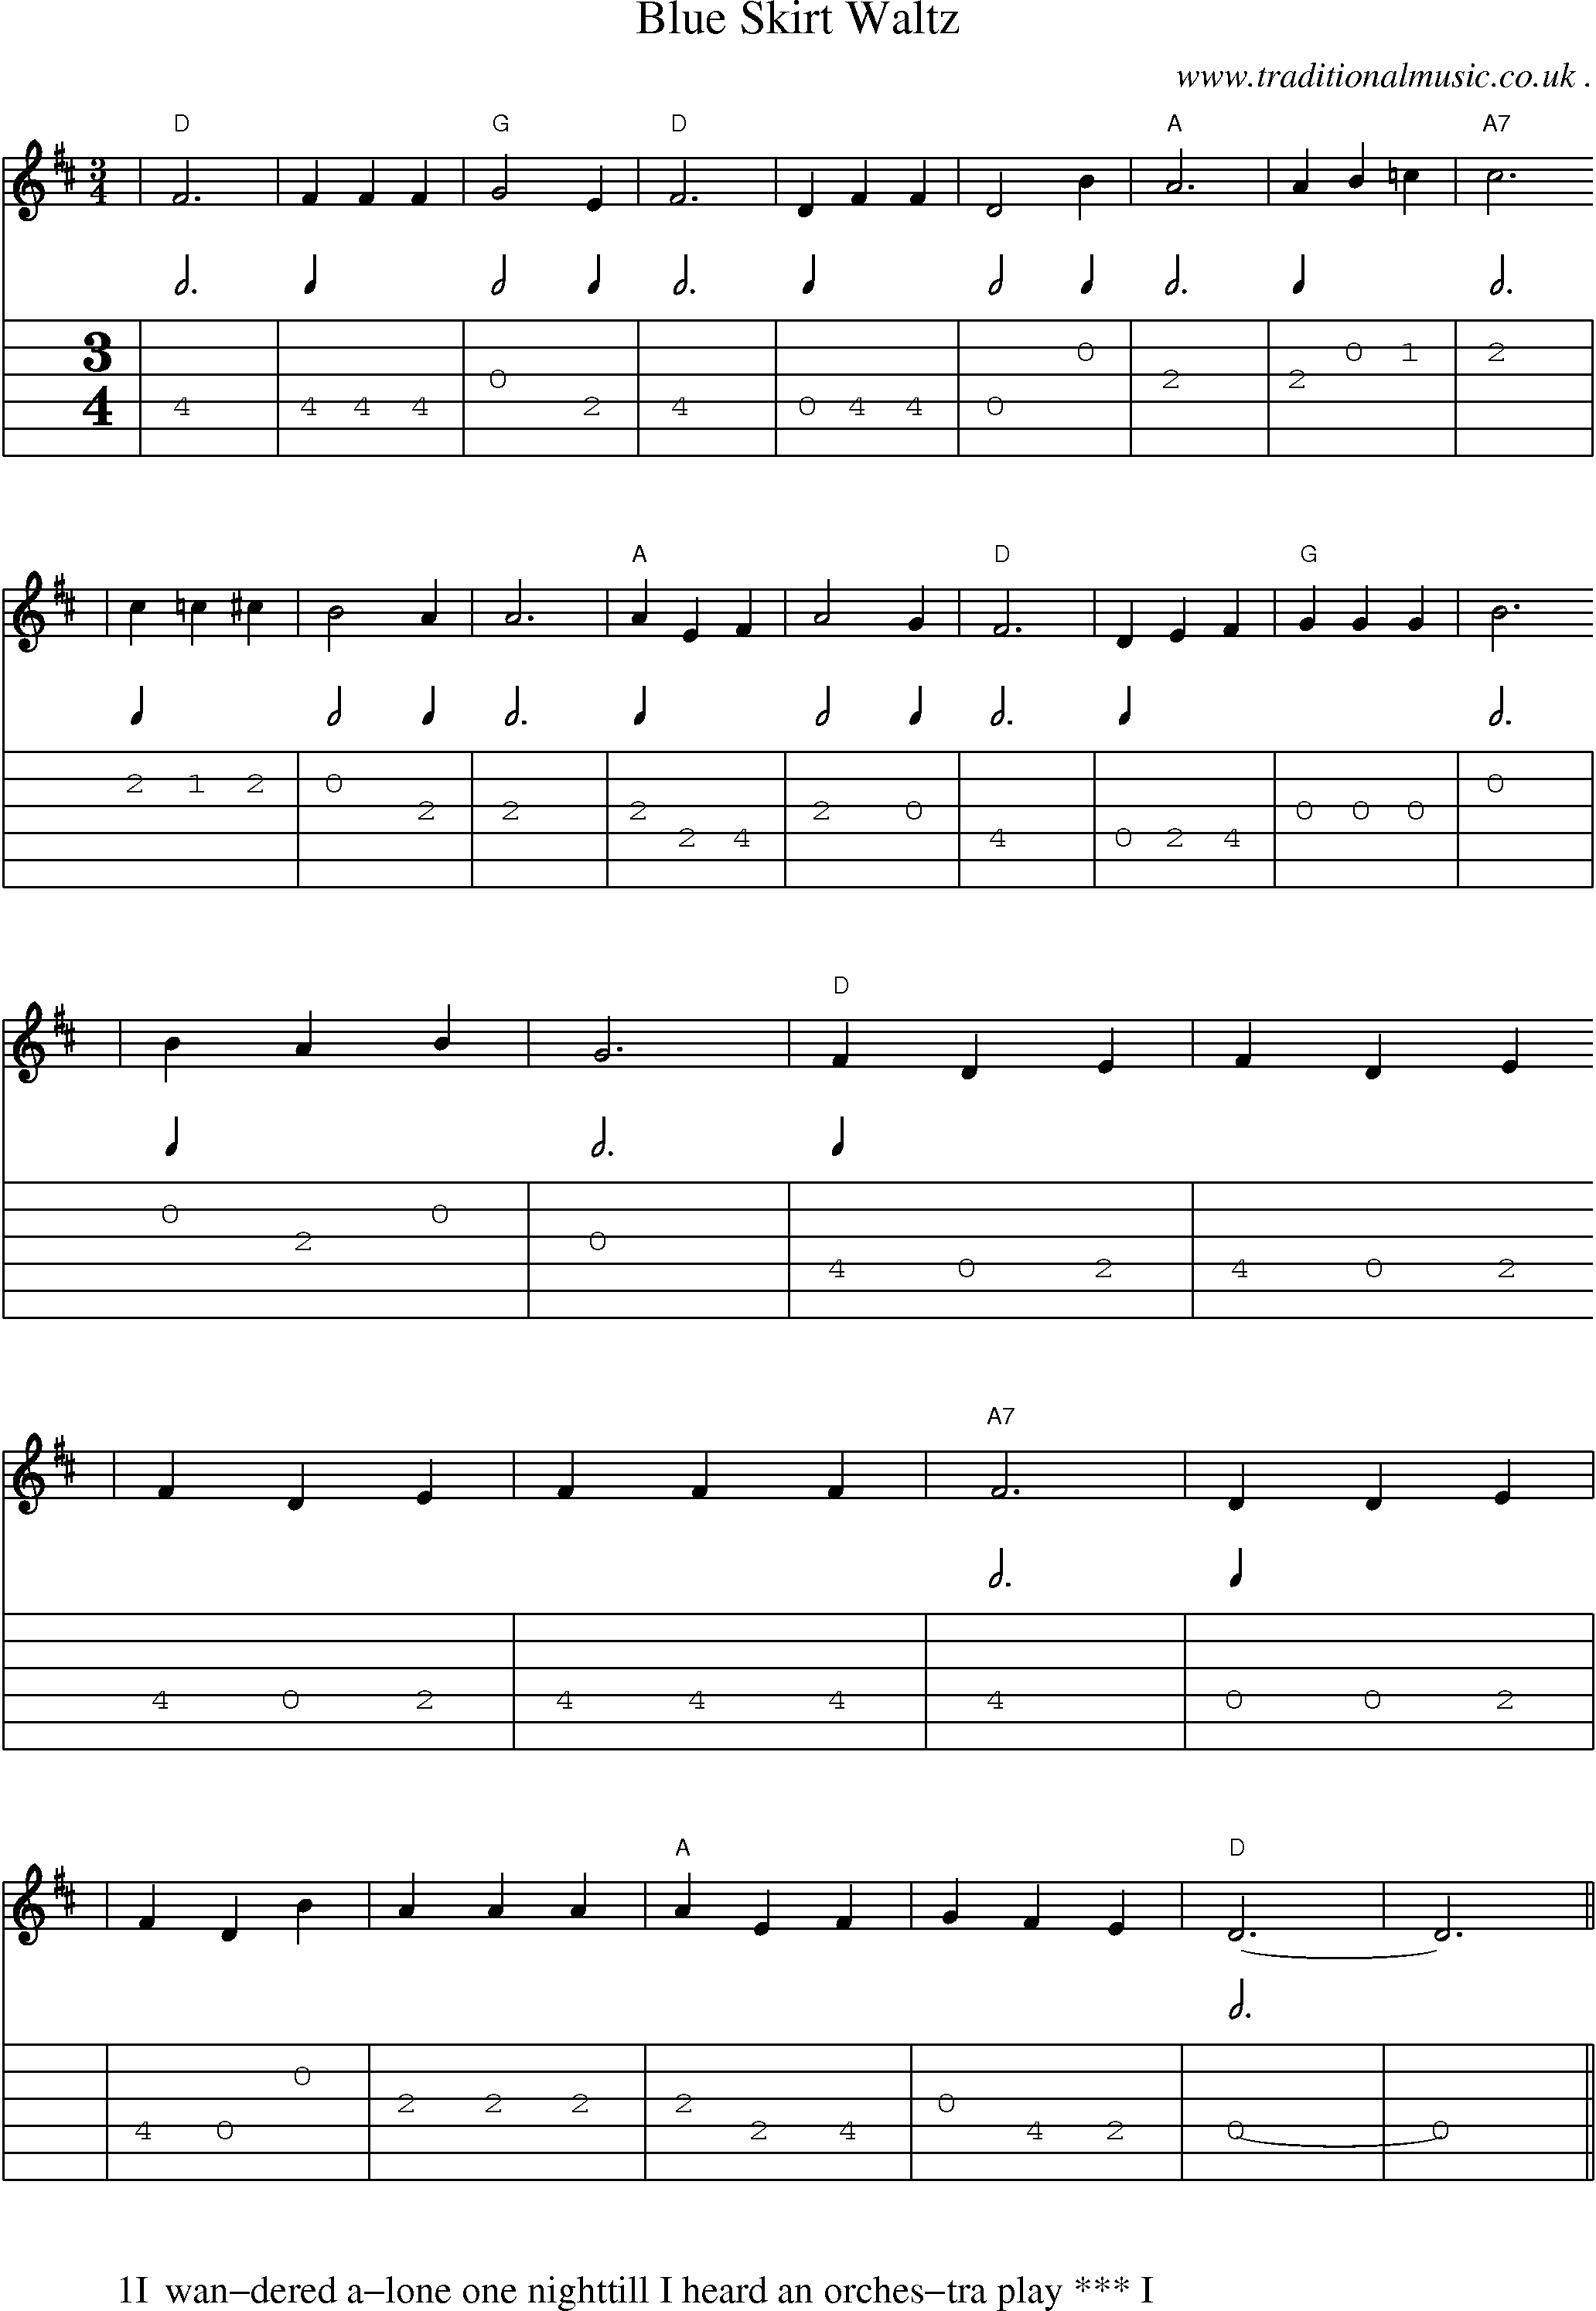 Music Score and Guitar Tabs for Blue Skirt Waltz